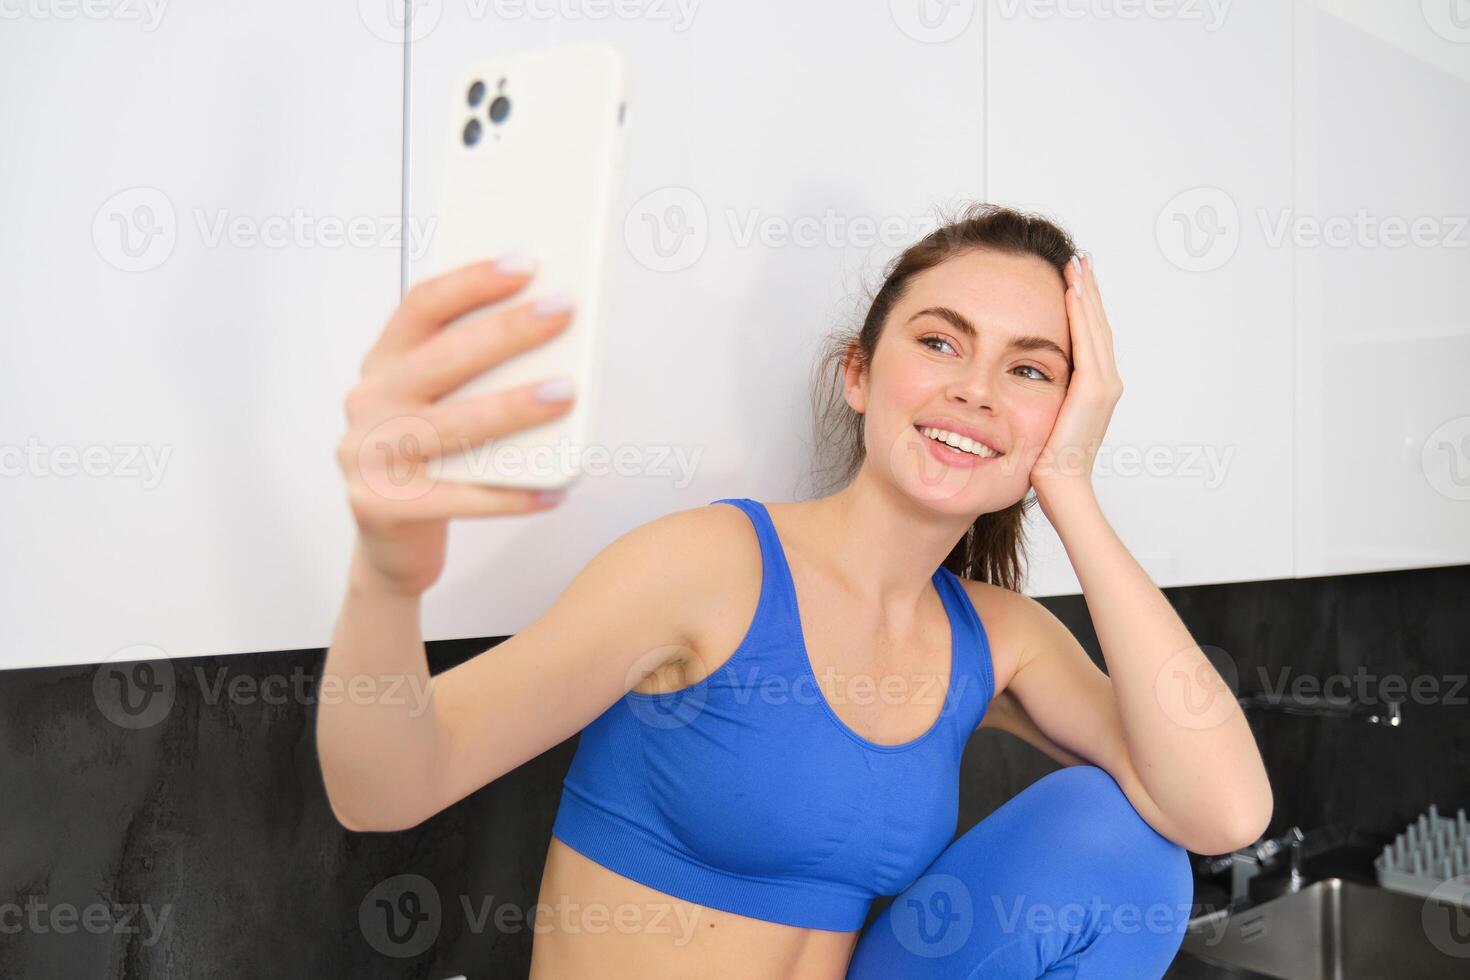 Image of fit and healthy, smiling fitness girl, posing for selfie on mobile phone, holding smartphone, looking at screen, taking photos in sportsbra and leggings